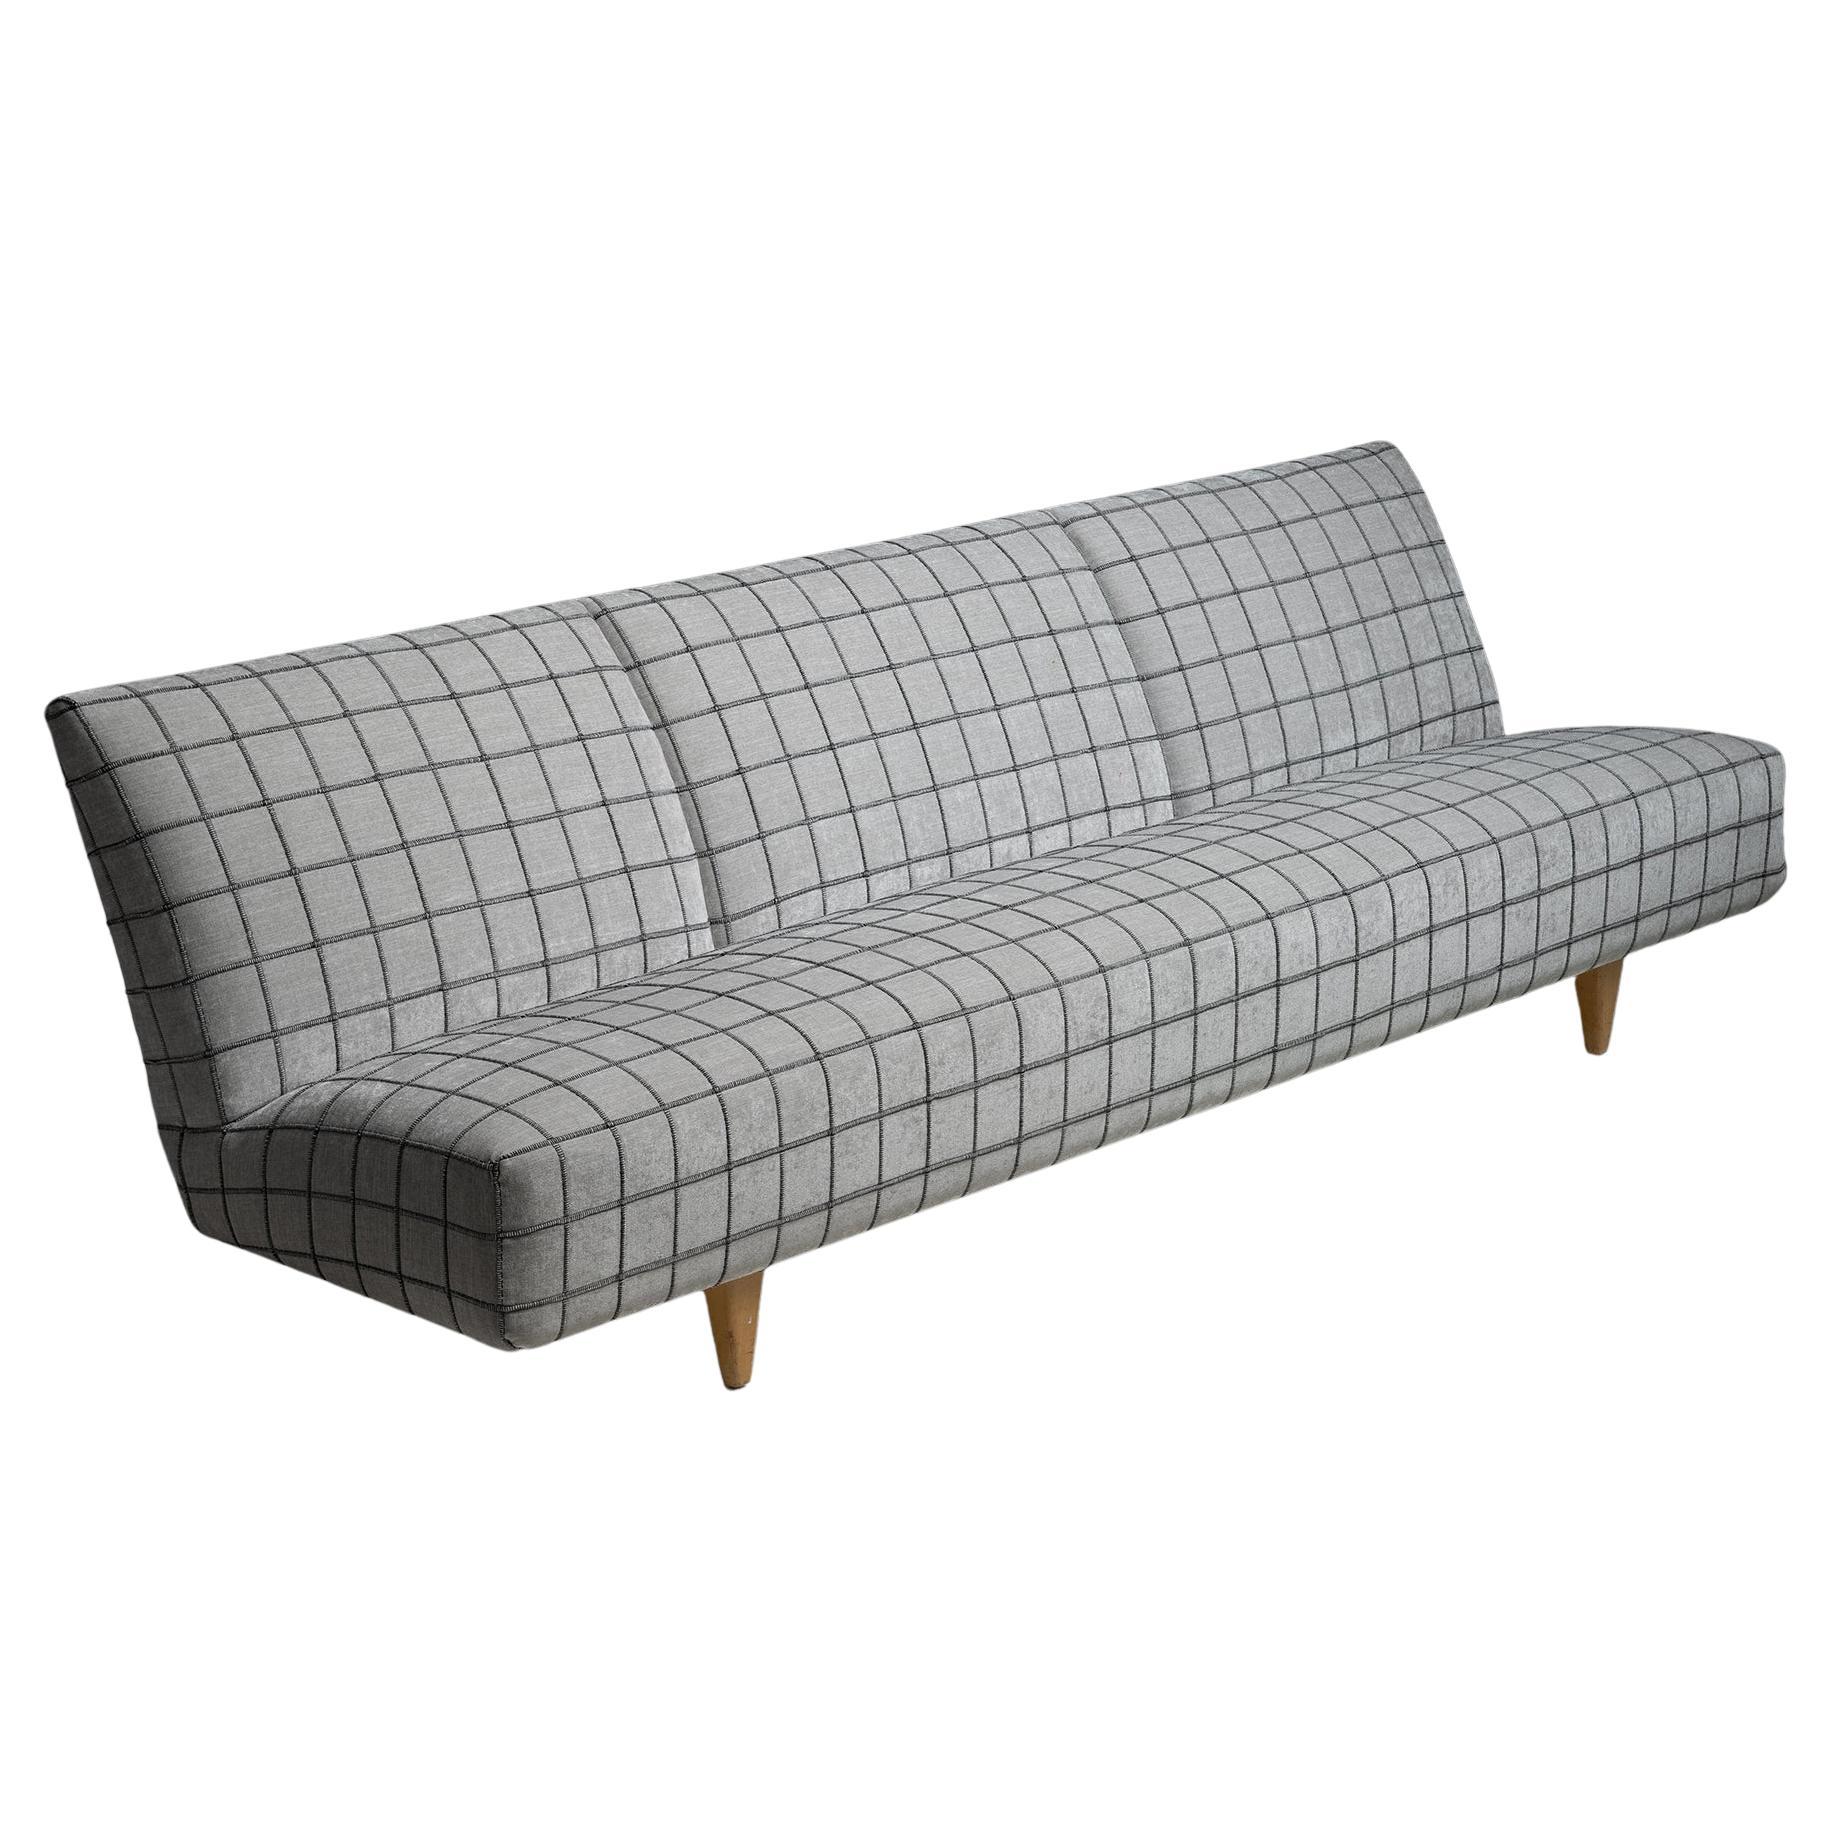 Sofa in Pierre Frey Fabric, Sweden circa 1961 For Sale